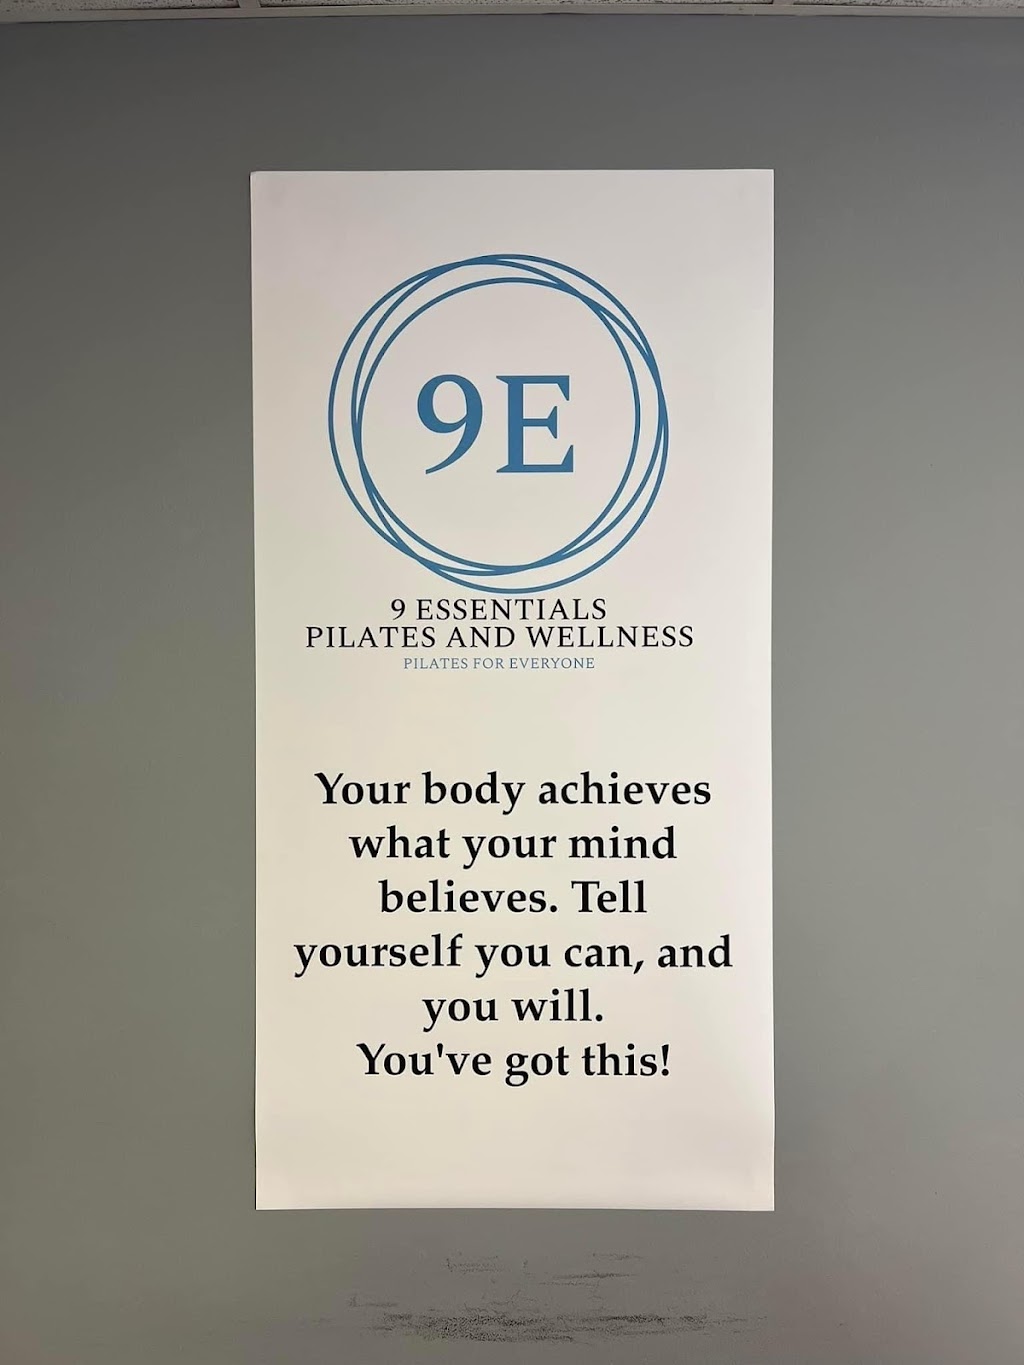 9 Essentials Pilates and Wellness | 858 NY-212, Saugerties, NY 12477 | Phone: (518) 653-0233